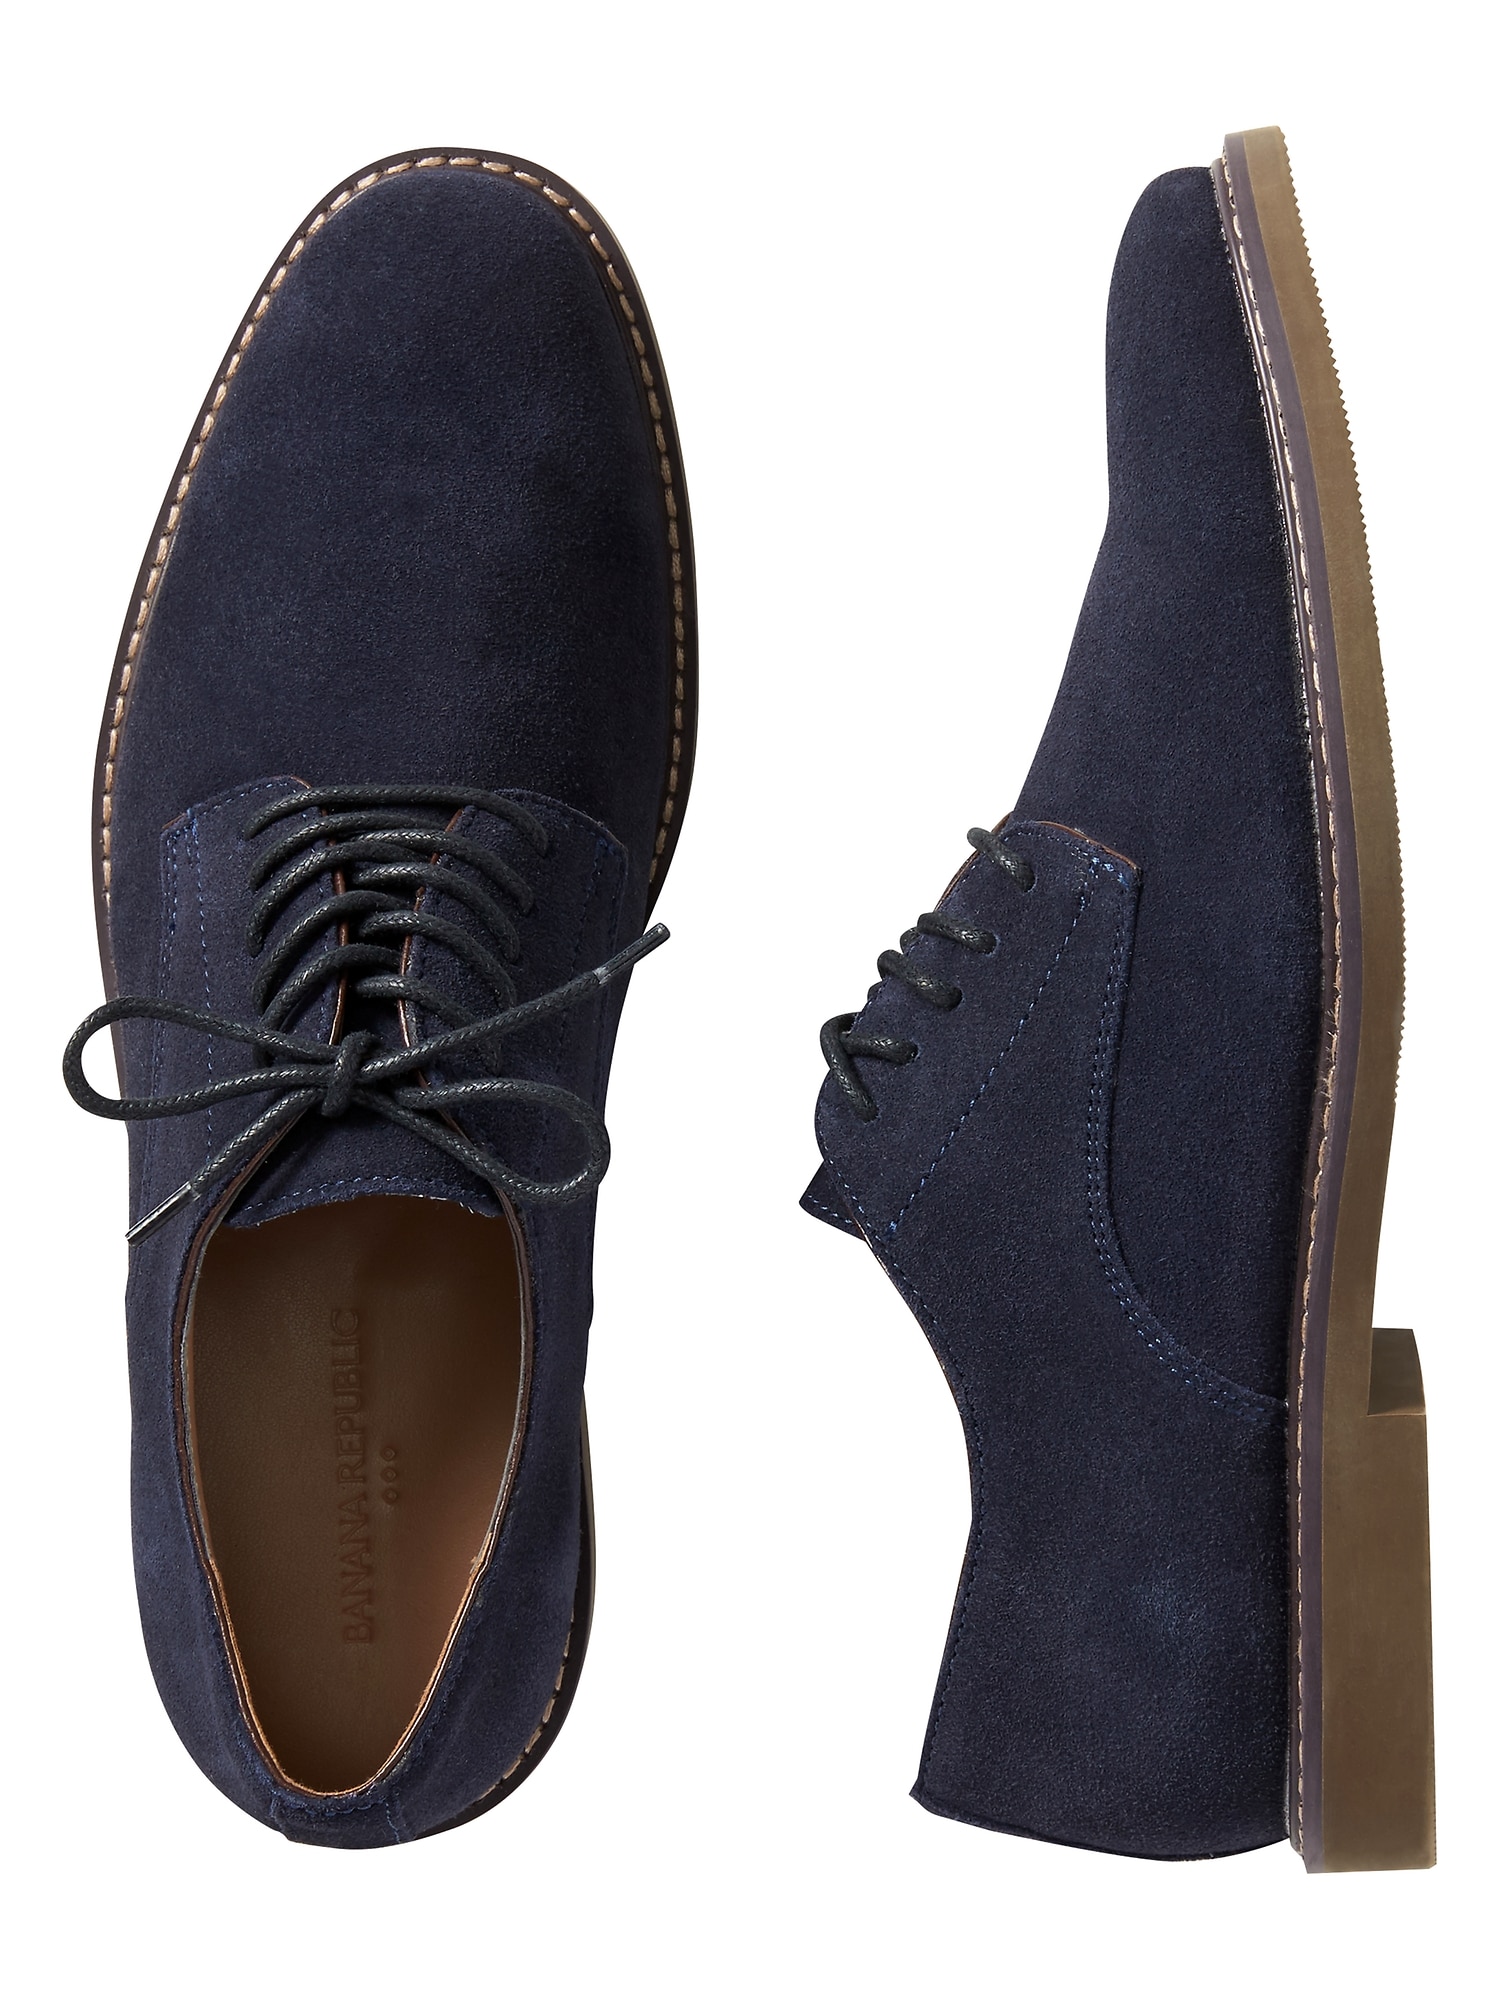 tan suede oxford shoes